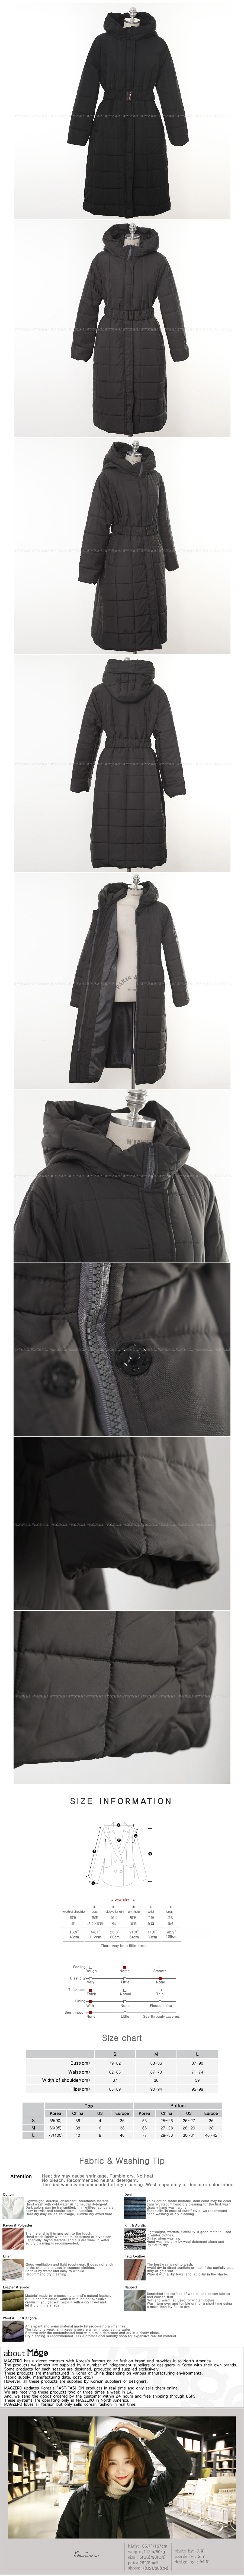 KOREA Oversize Long Quilted Puffer Coat With Belt Grey One Size(S-M) [Free Shipping]